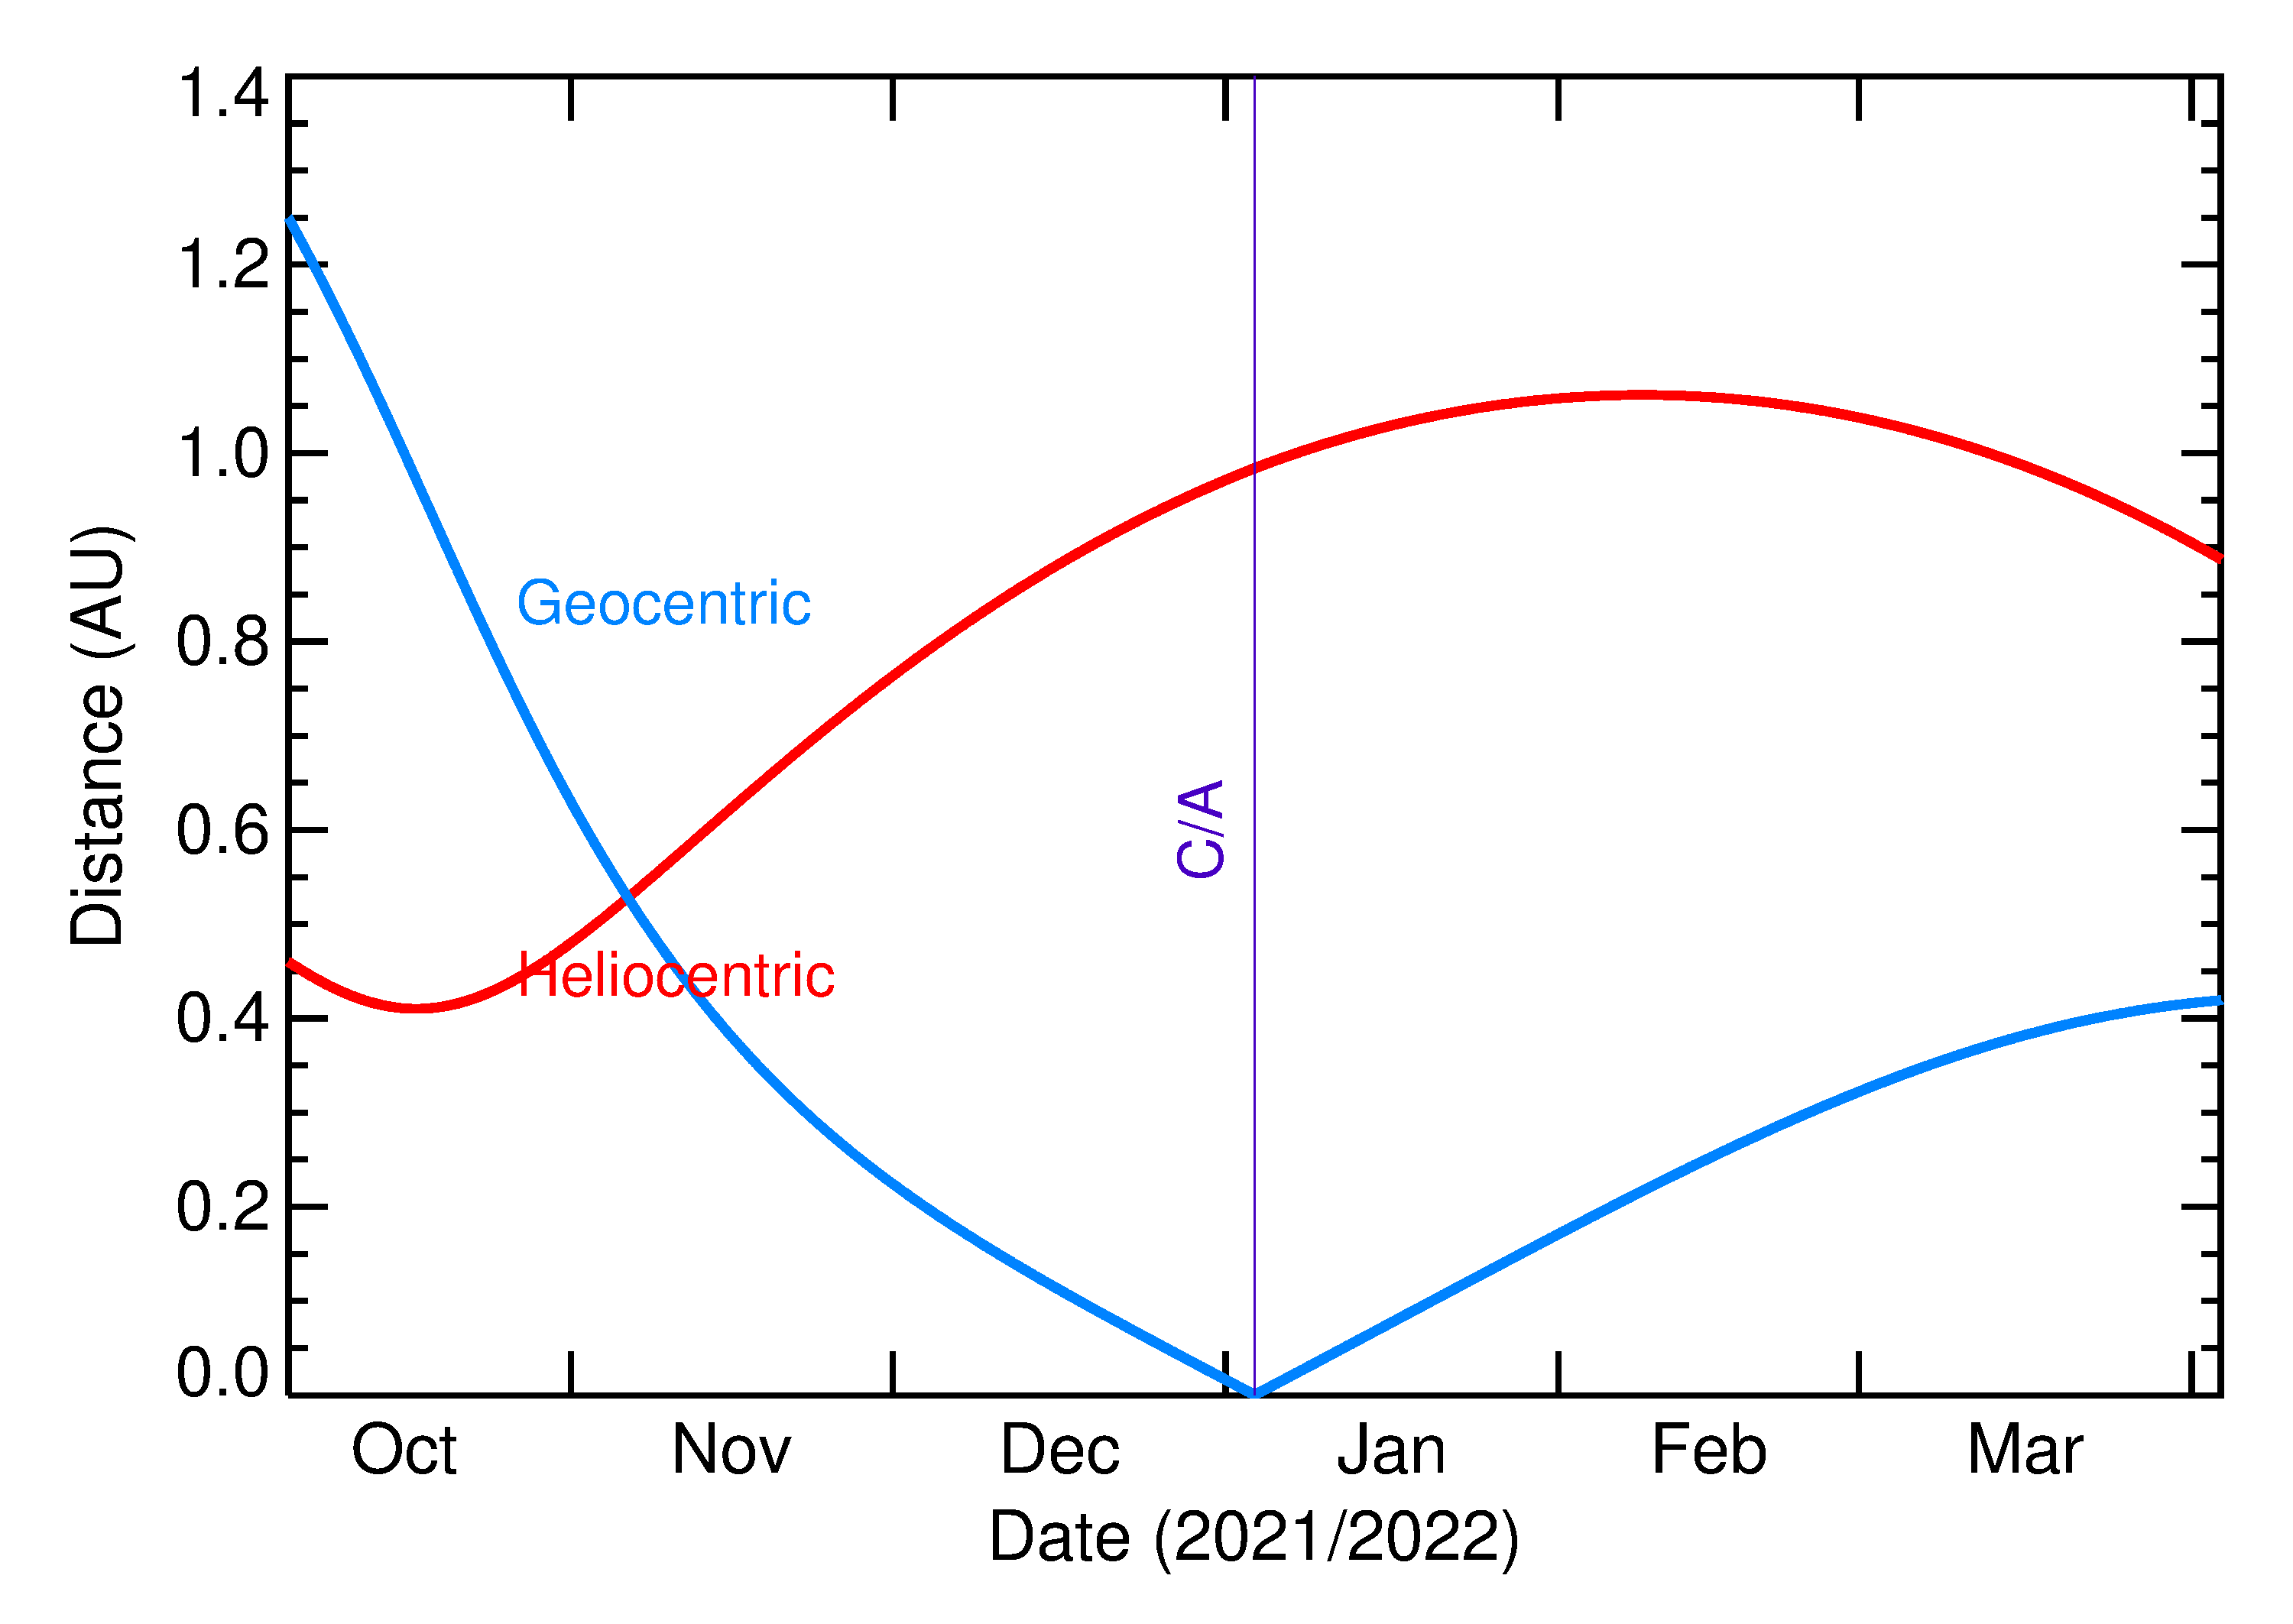 Heliocentric and Geocentric Distances of 2022 AP1 in the months around closest approach